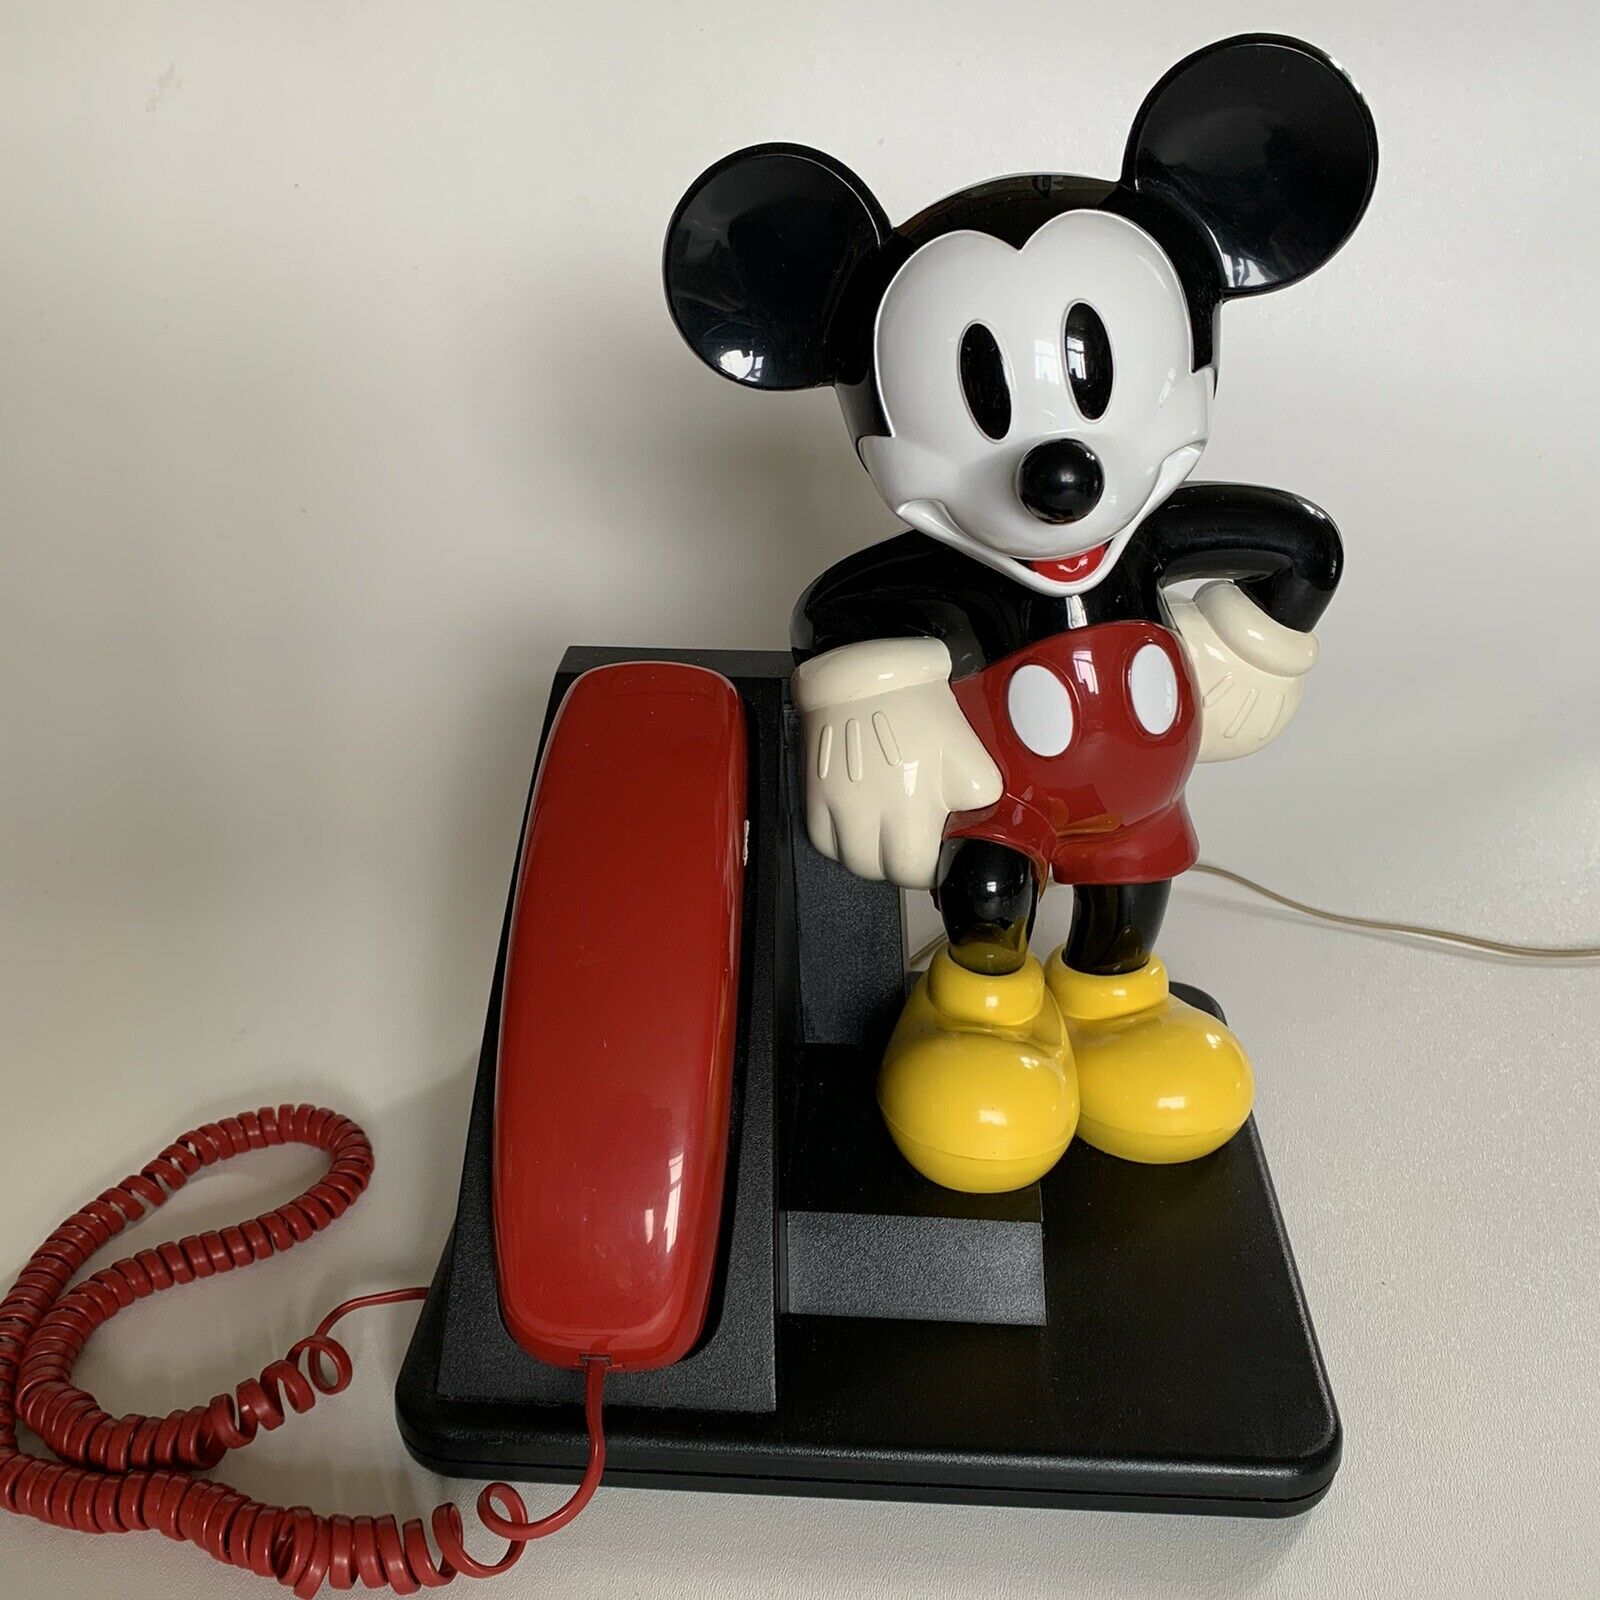 Disney Mickey Mouse Phone 1990s At&t Telephone, Push Button Untested Landline